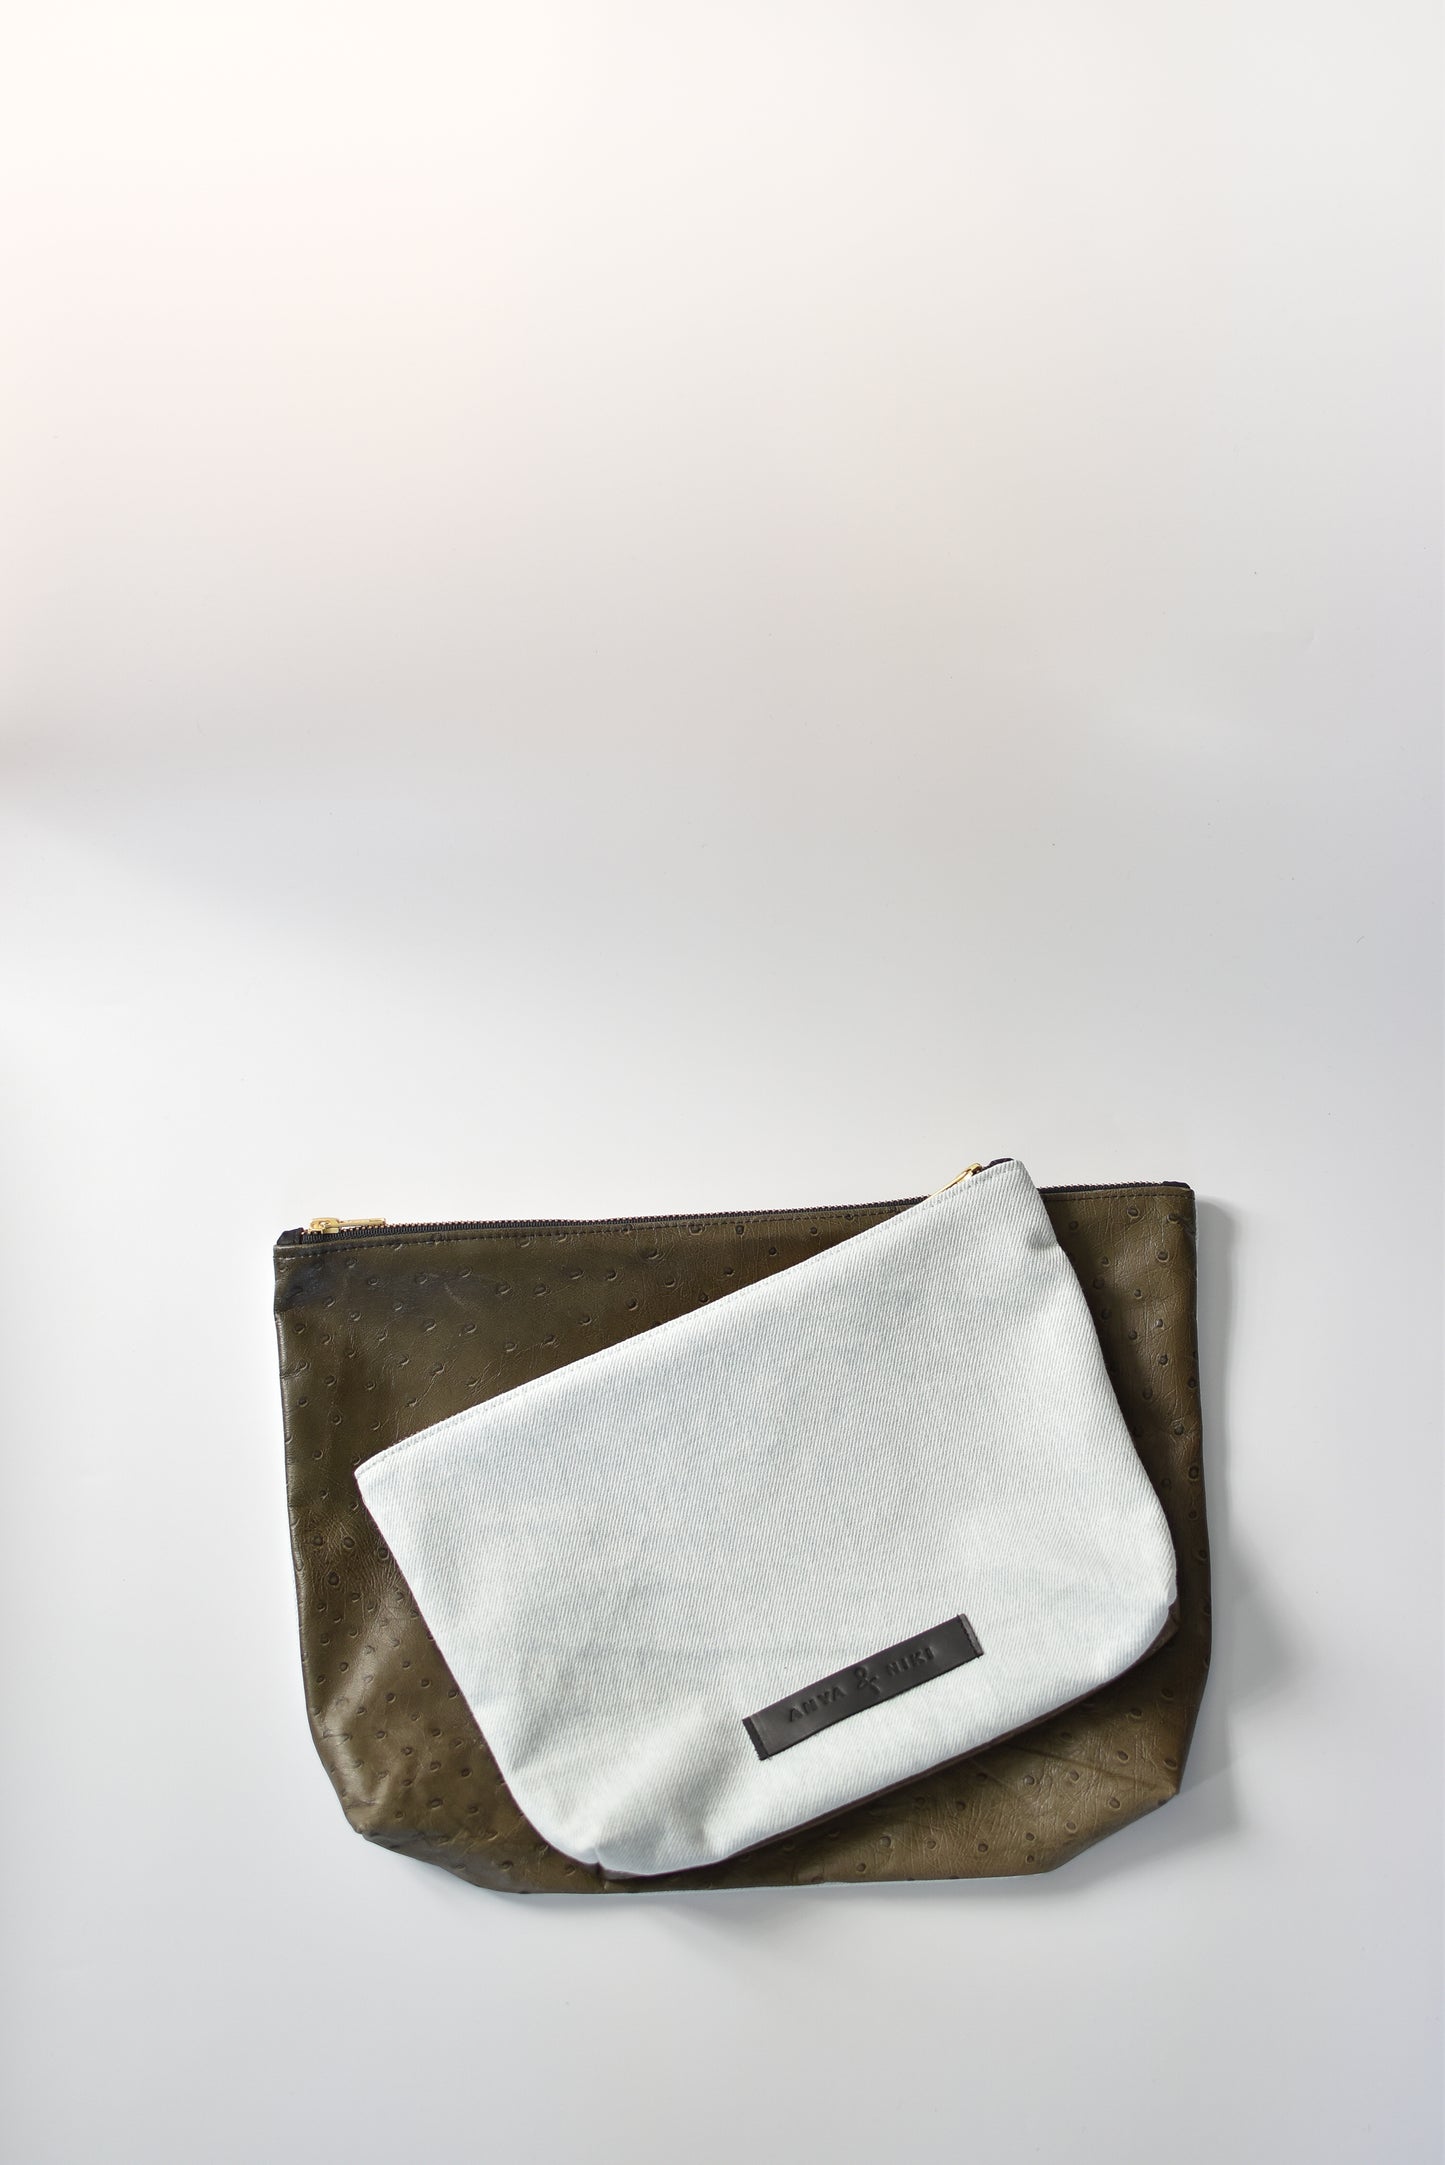 Bleached denim and fern colored embossed leather skin medium and large pouch with brass zipper and leather logo label.